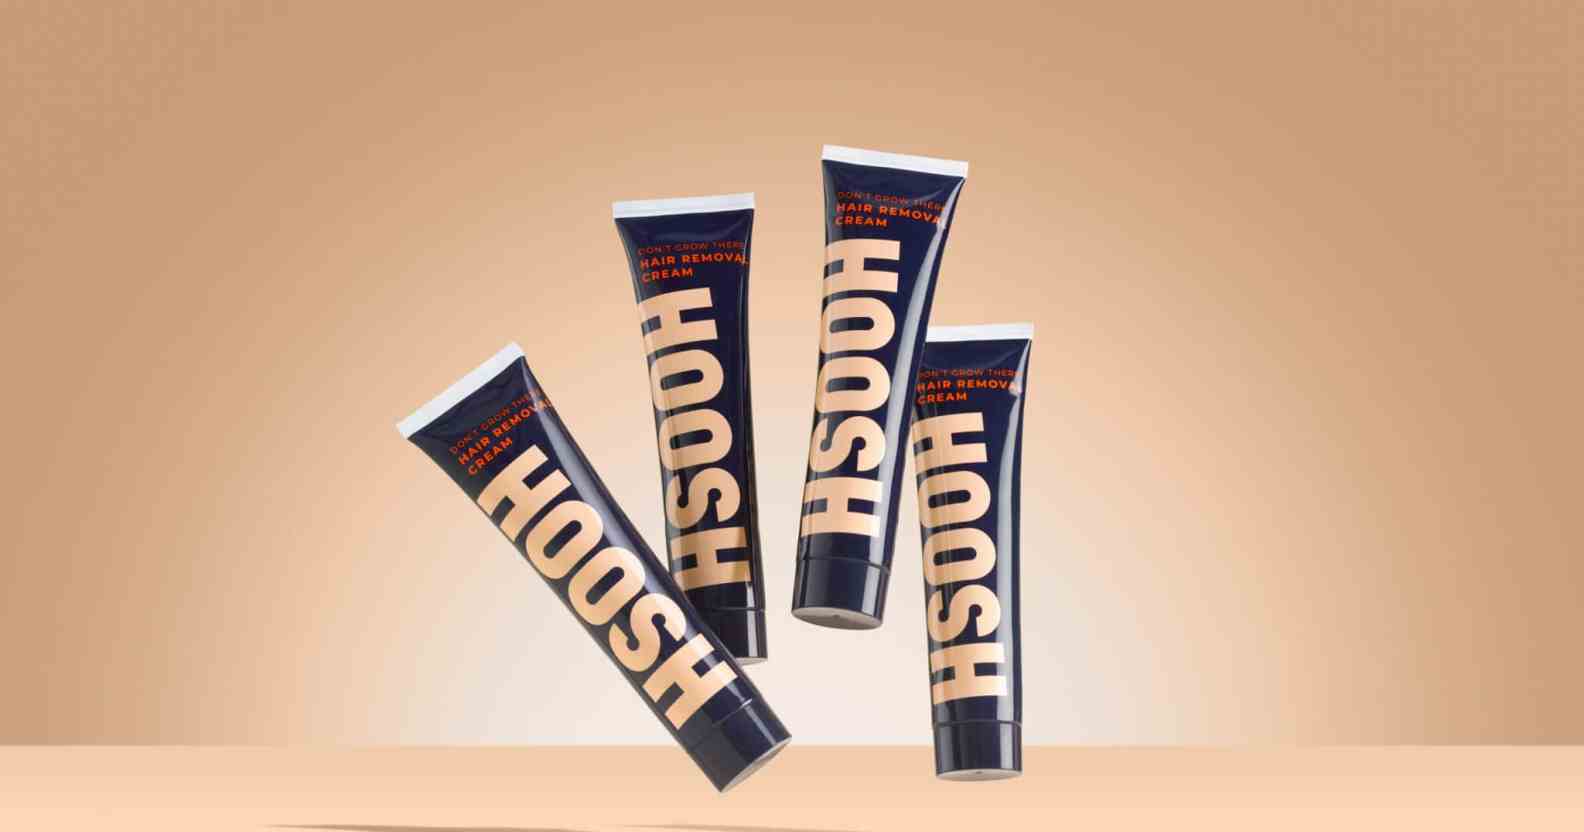 New brand Hoosh has launched a vegan hair removal cream for men